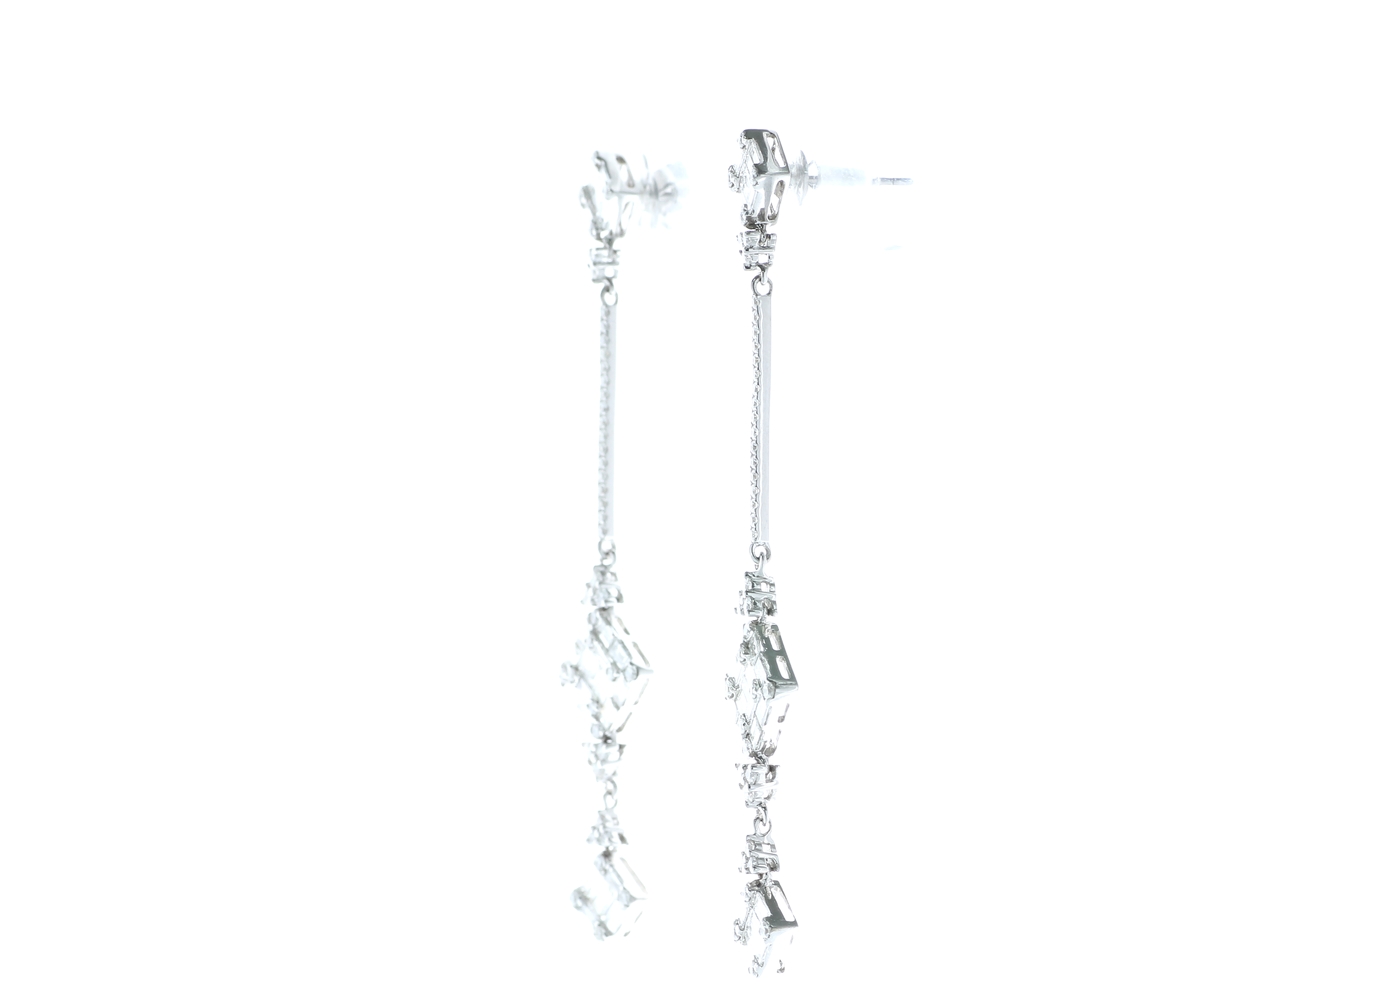 18ct White Gold Diamond Drop Earrings 2.29 Carats - Image 2 of 4